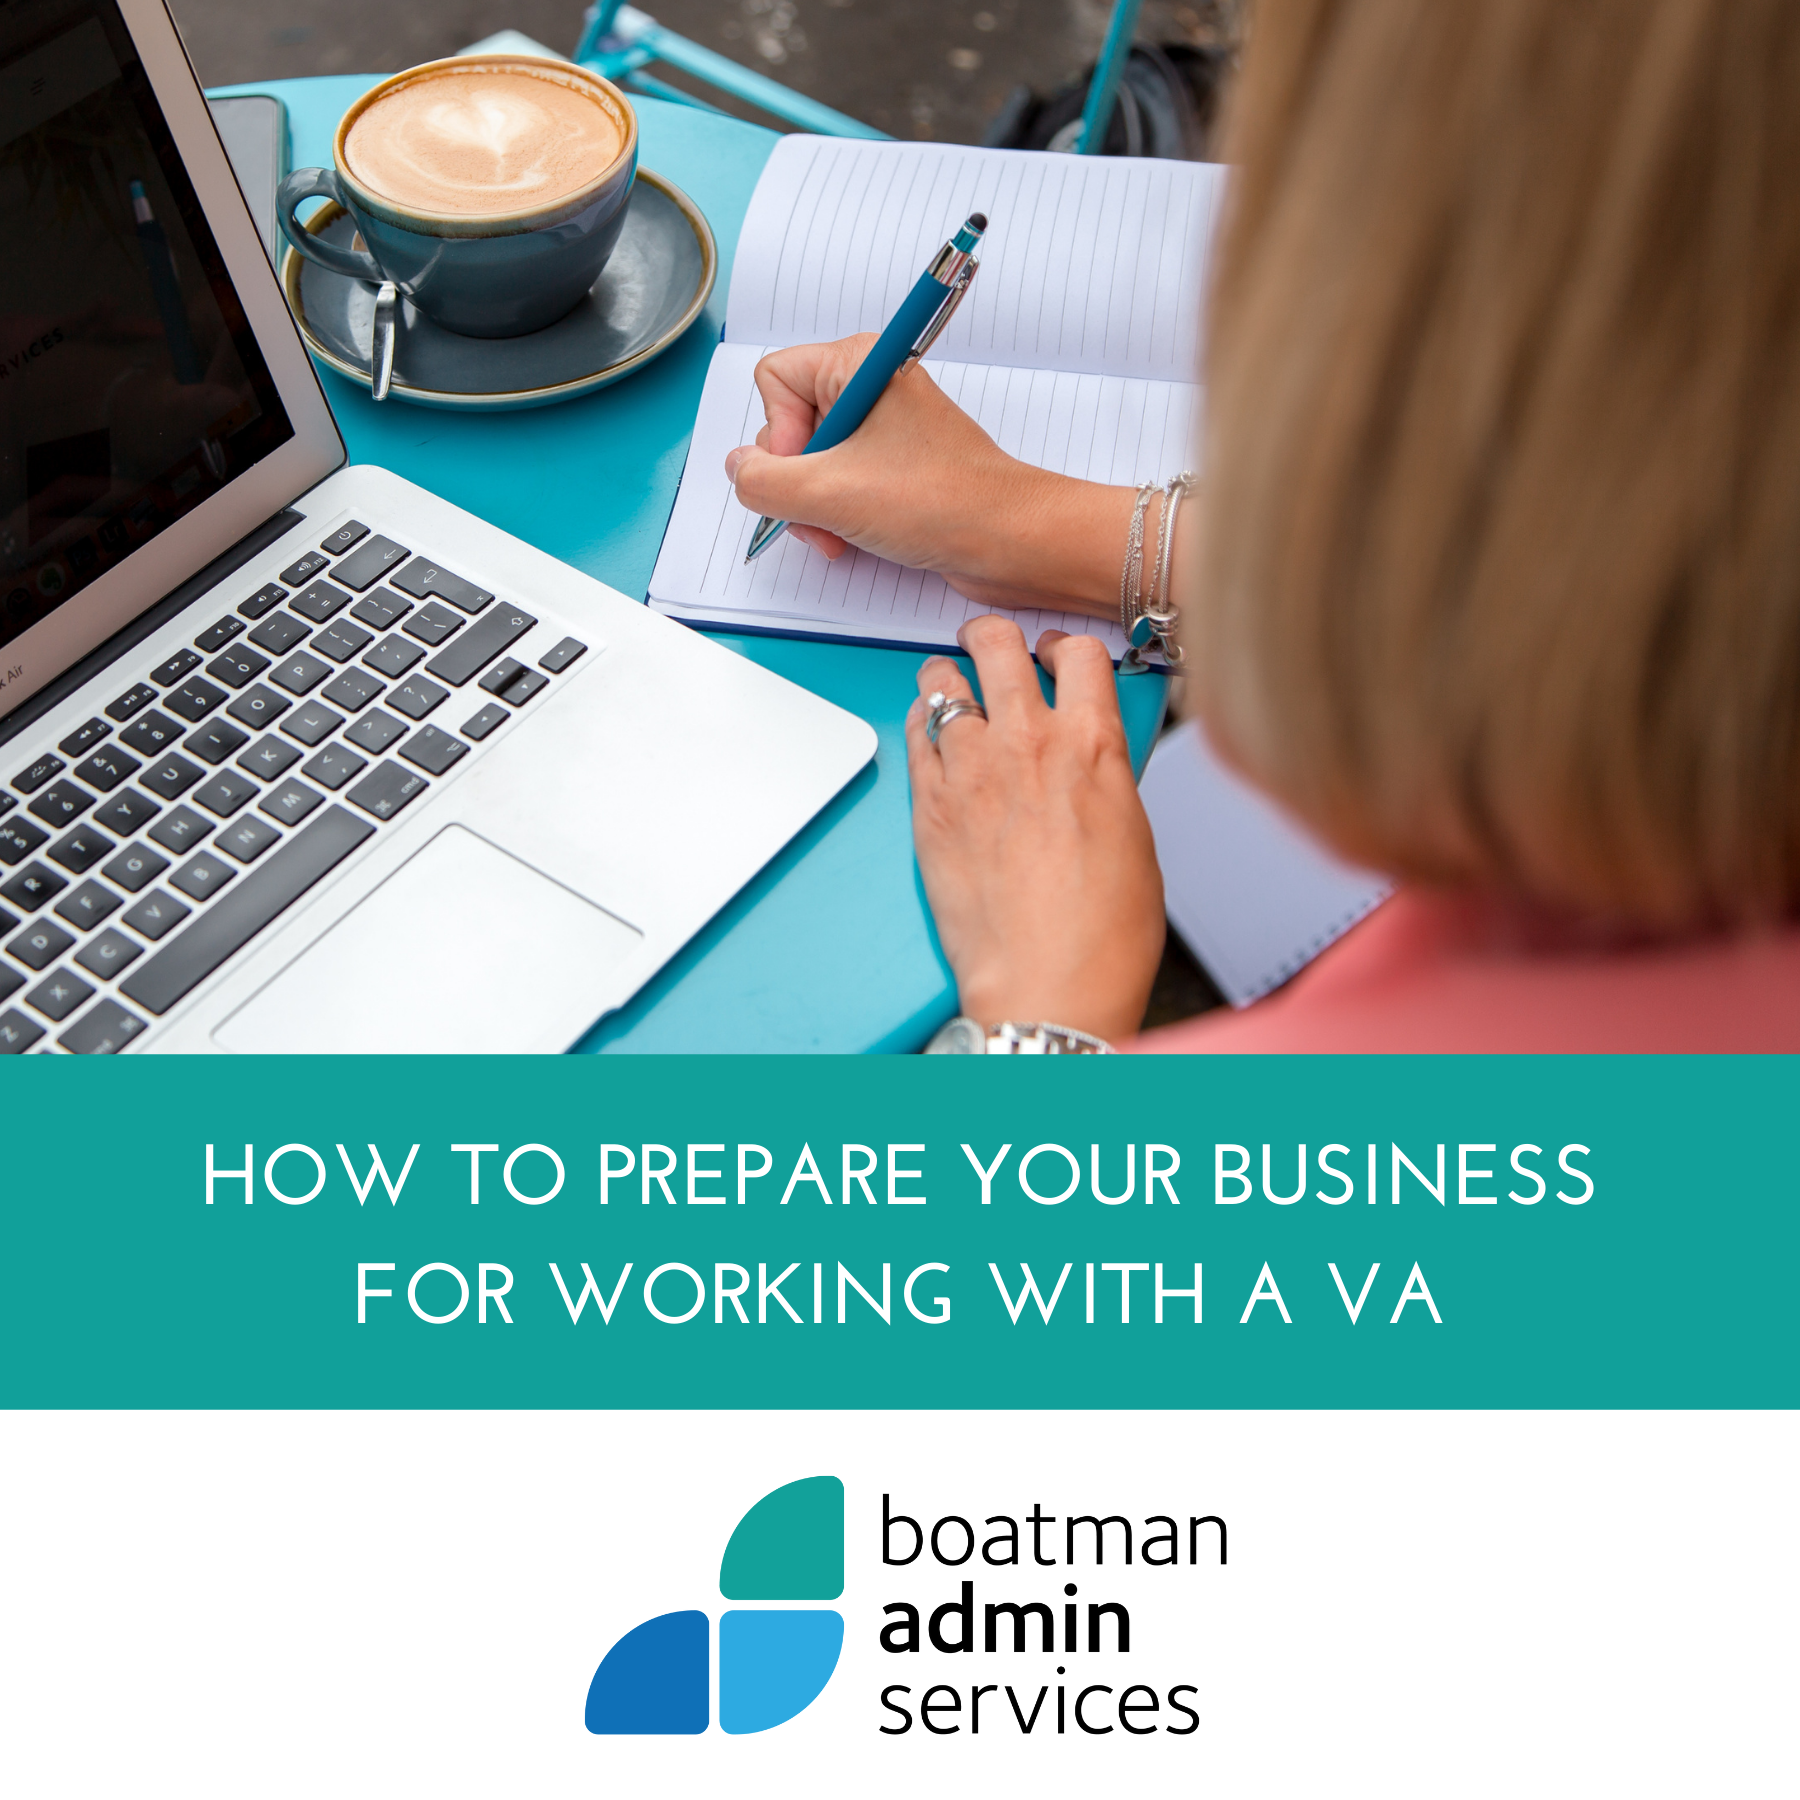 How best to prepare your business for working with a VA